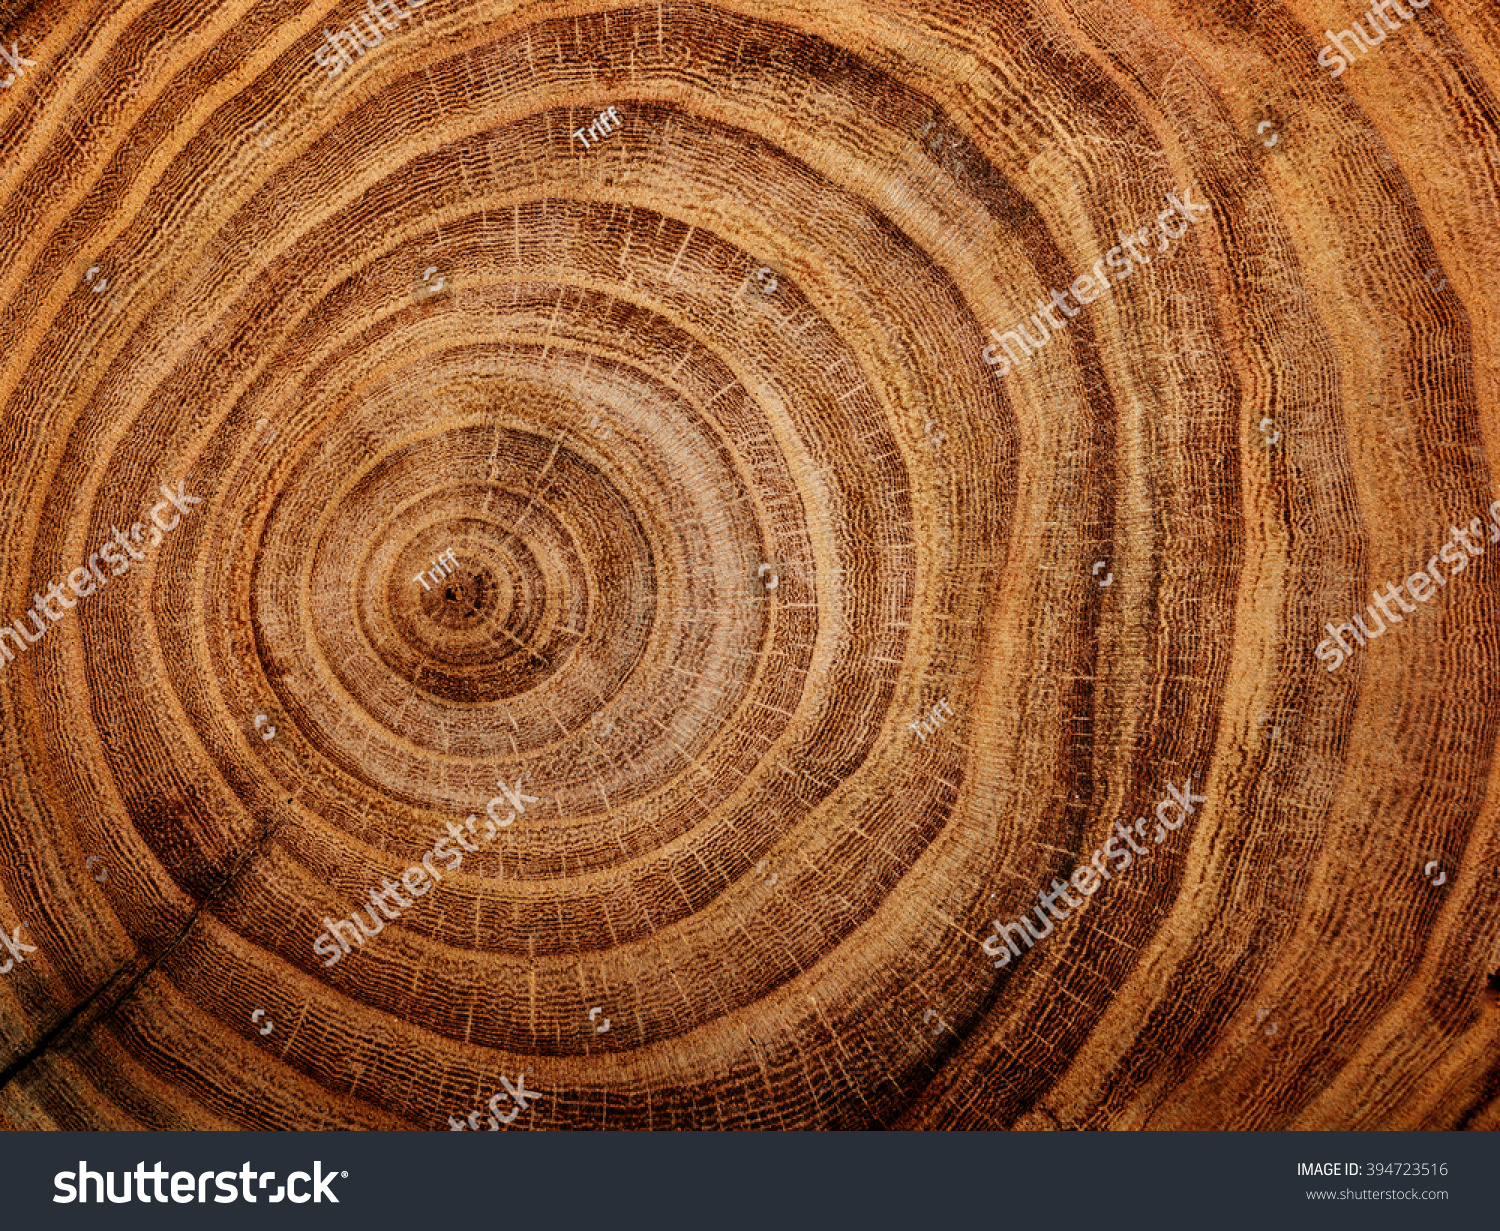 stump of oak tree felled - section of the trunk with annual rings #394723516